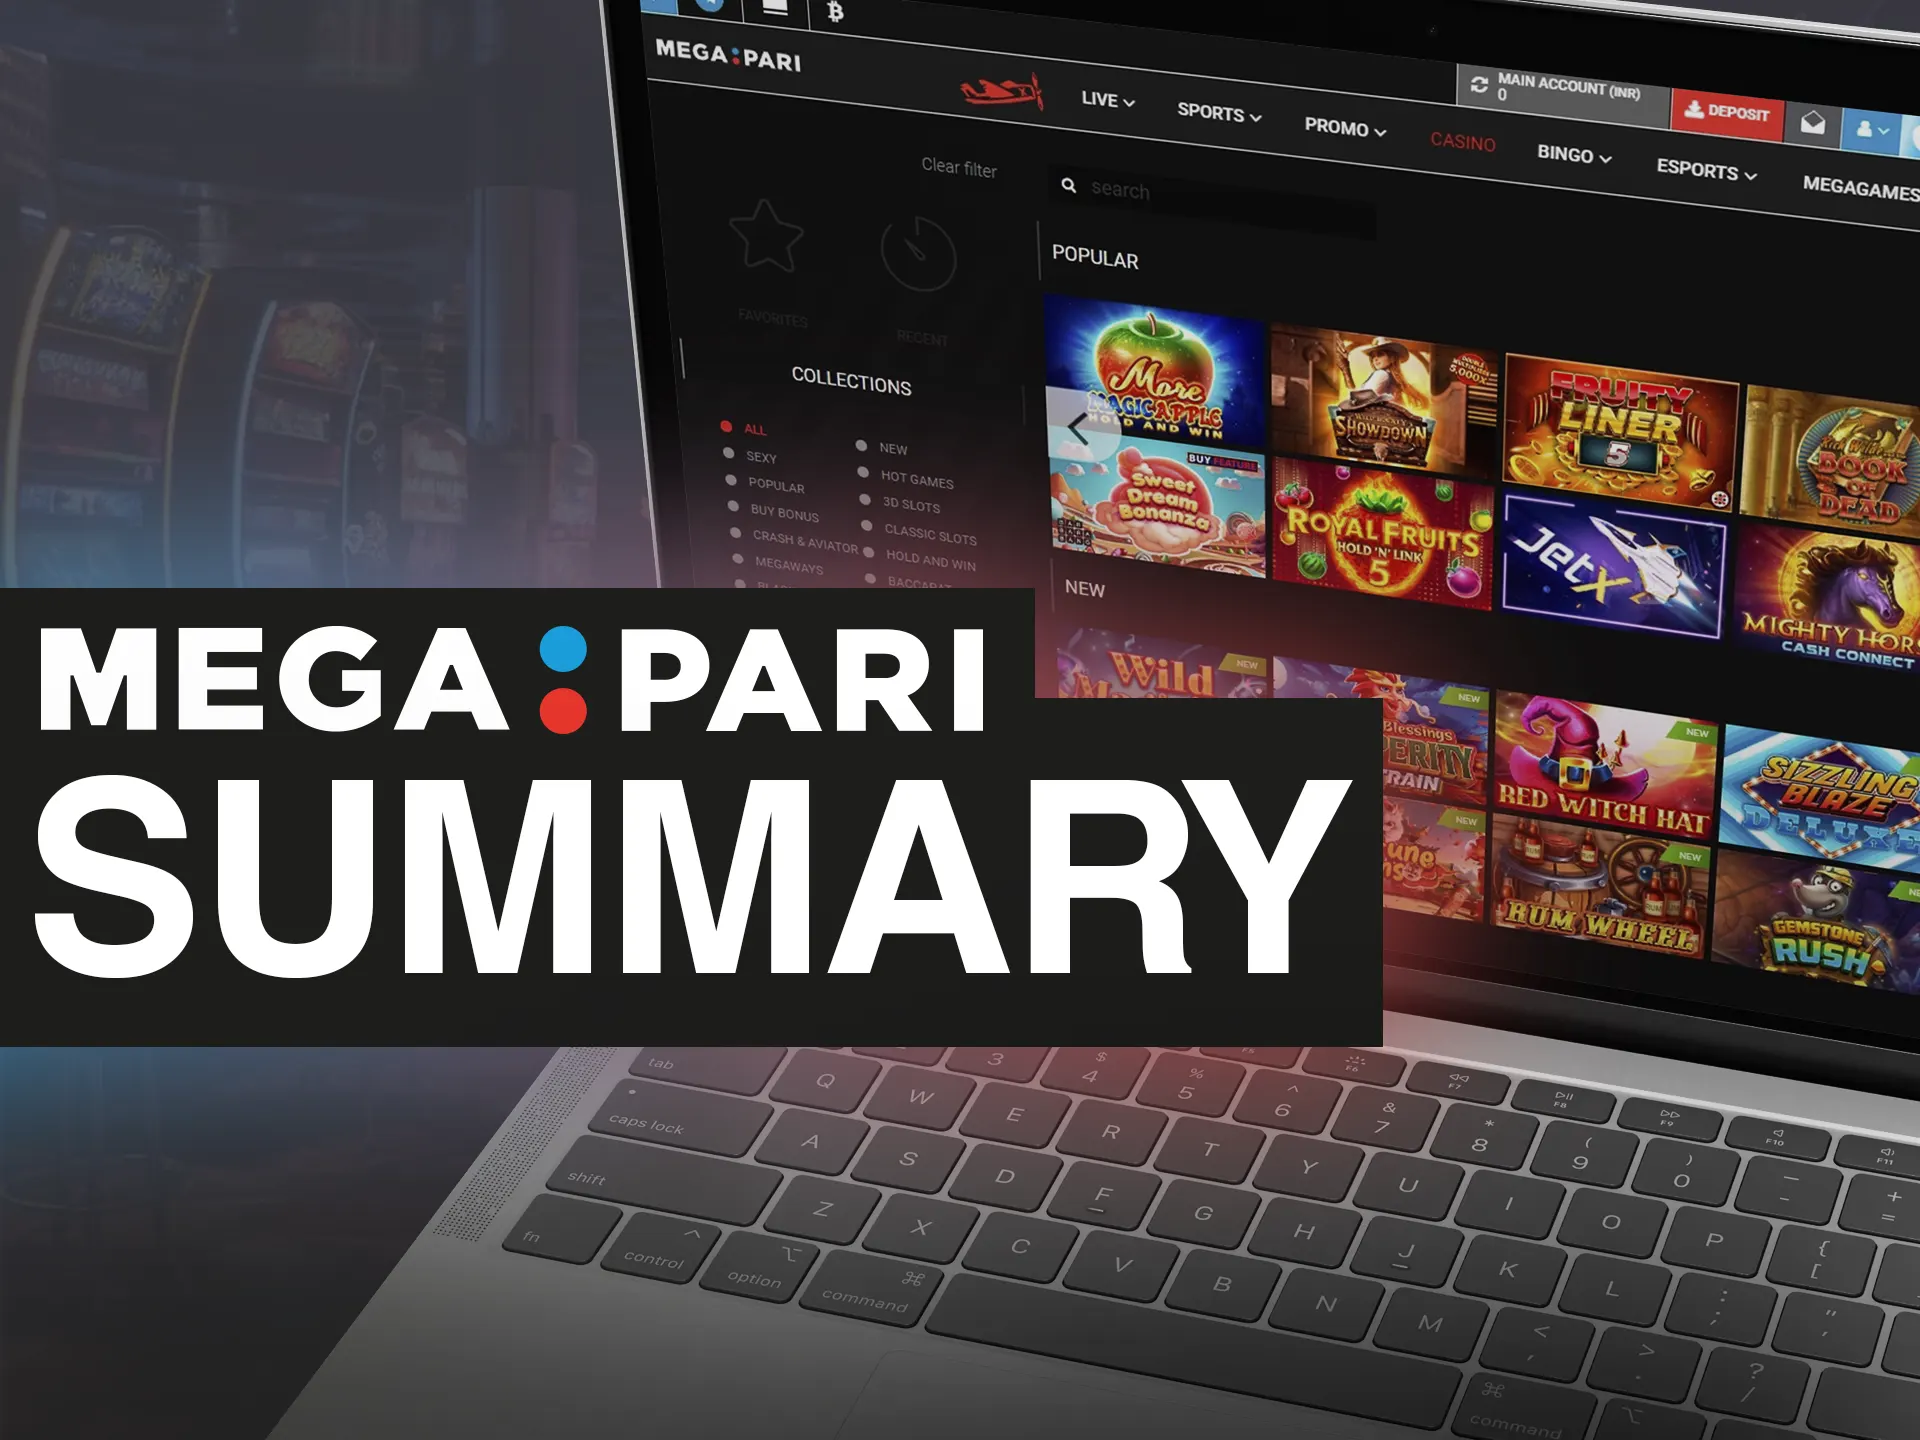 Megapari offers a huge selection of games and much more.